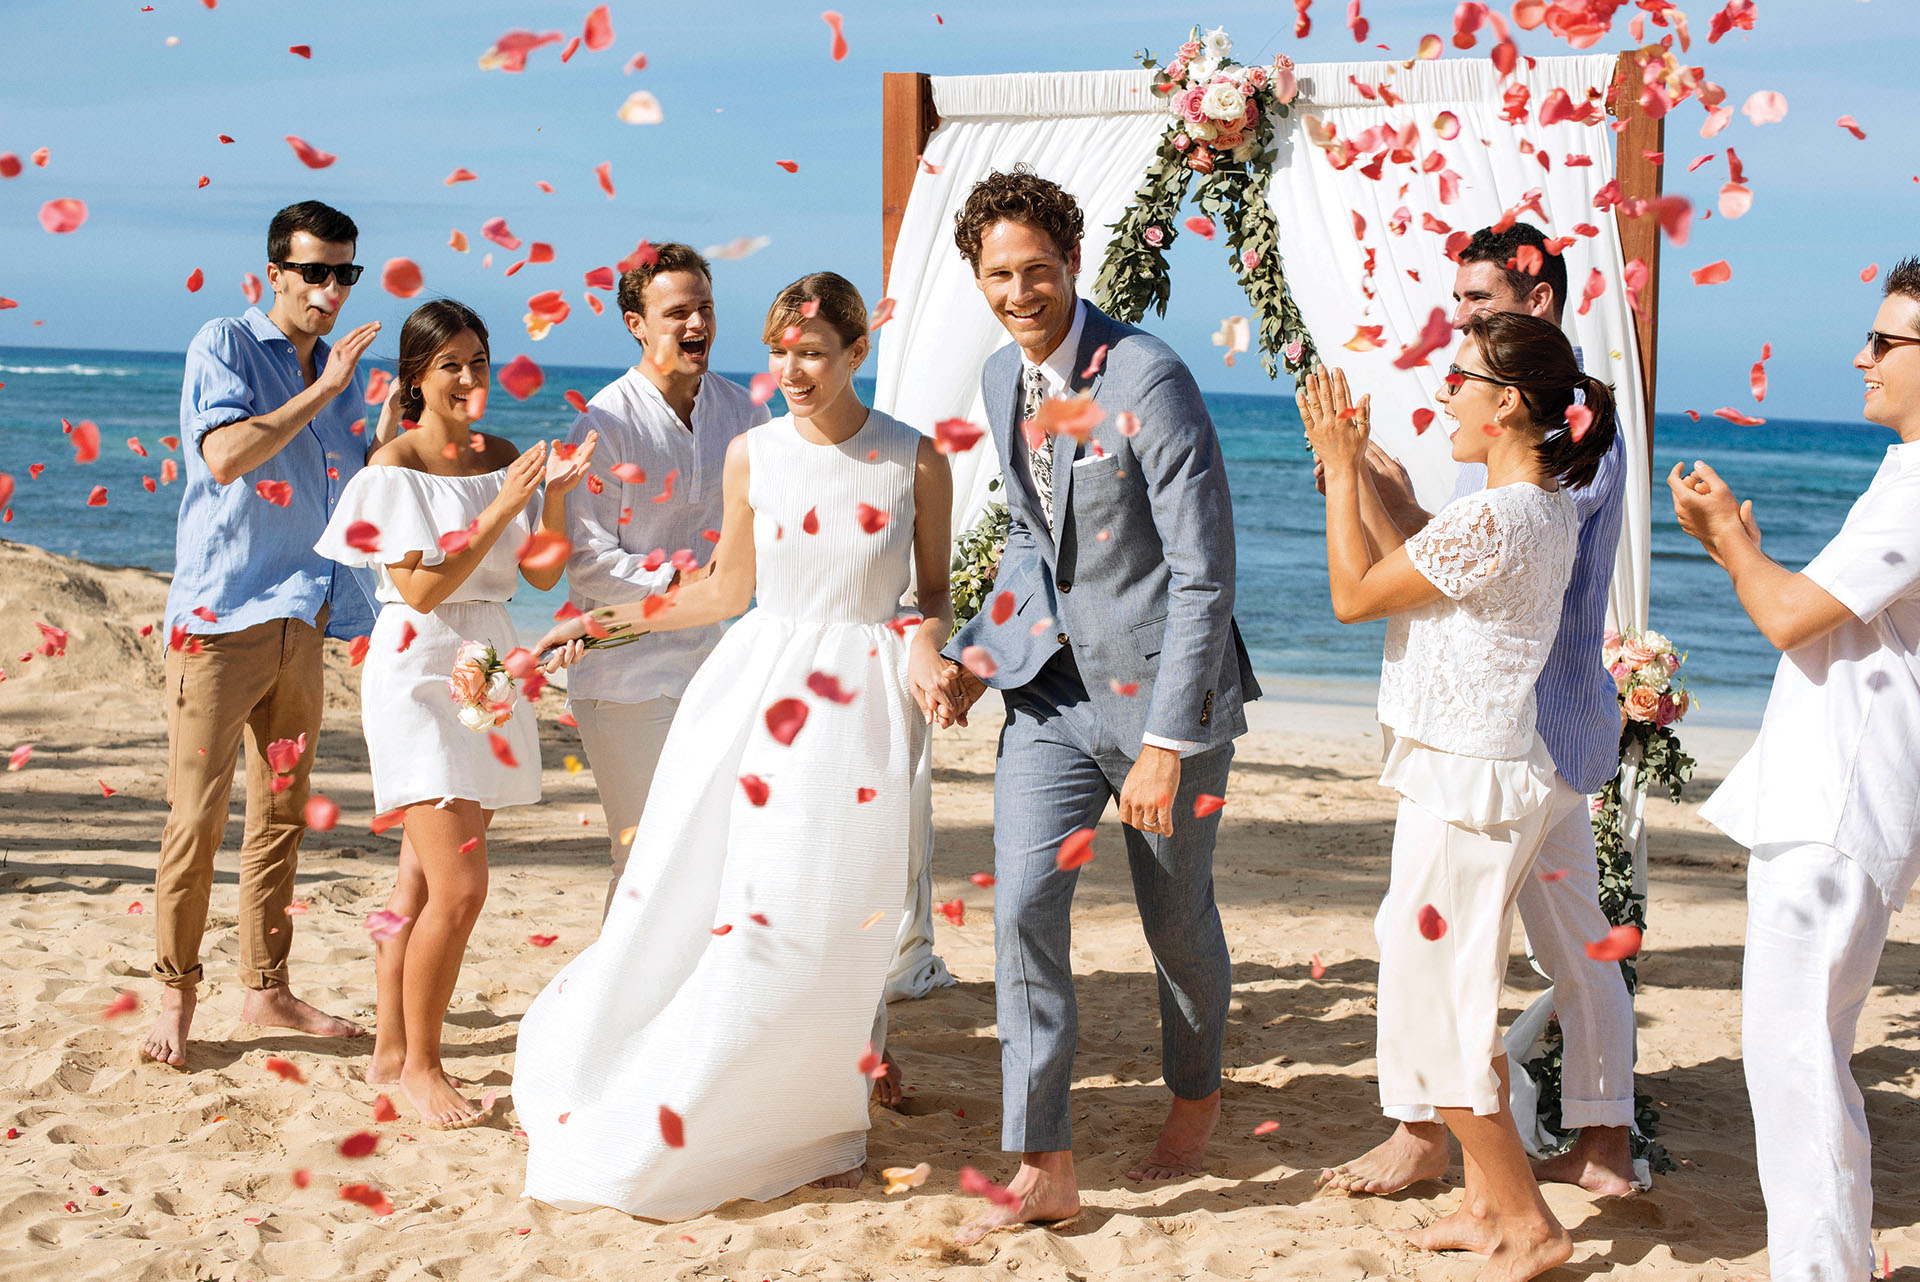 Wedding guests celebrating in an adults only resort